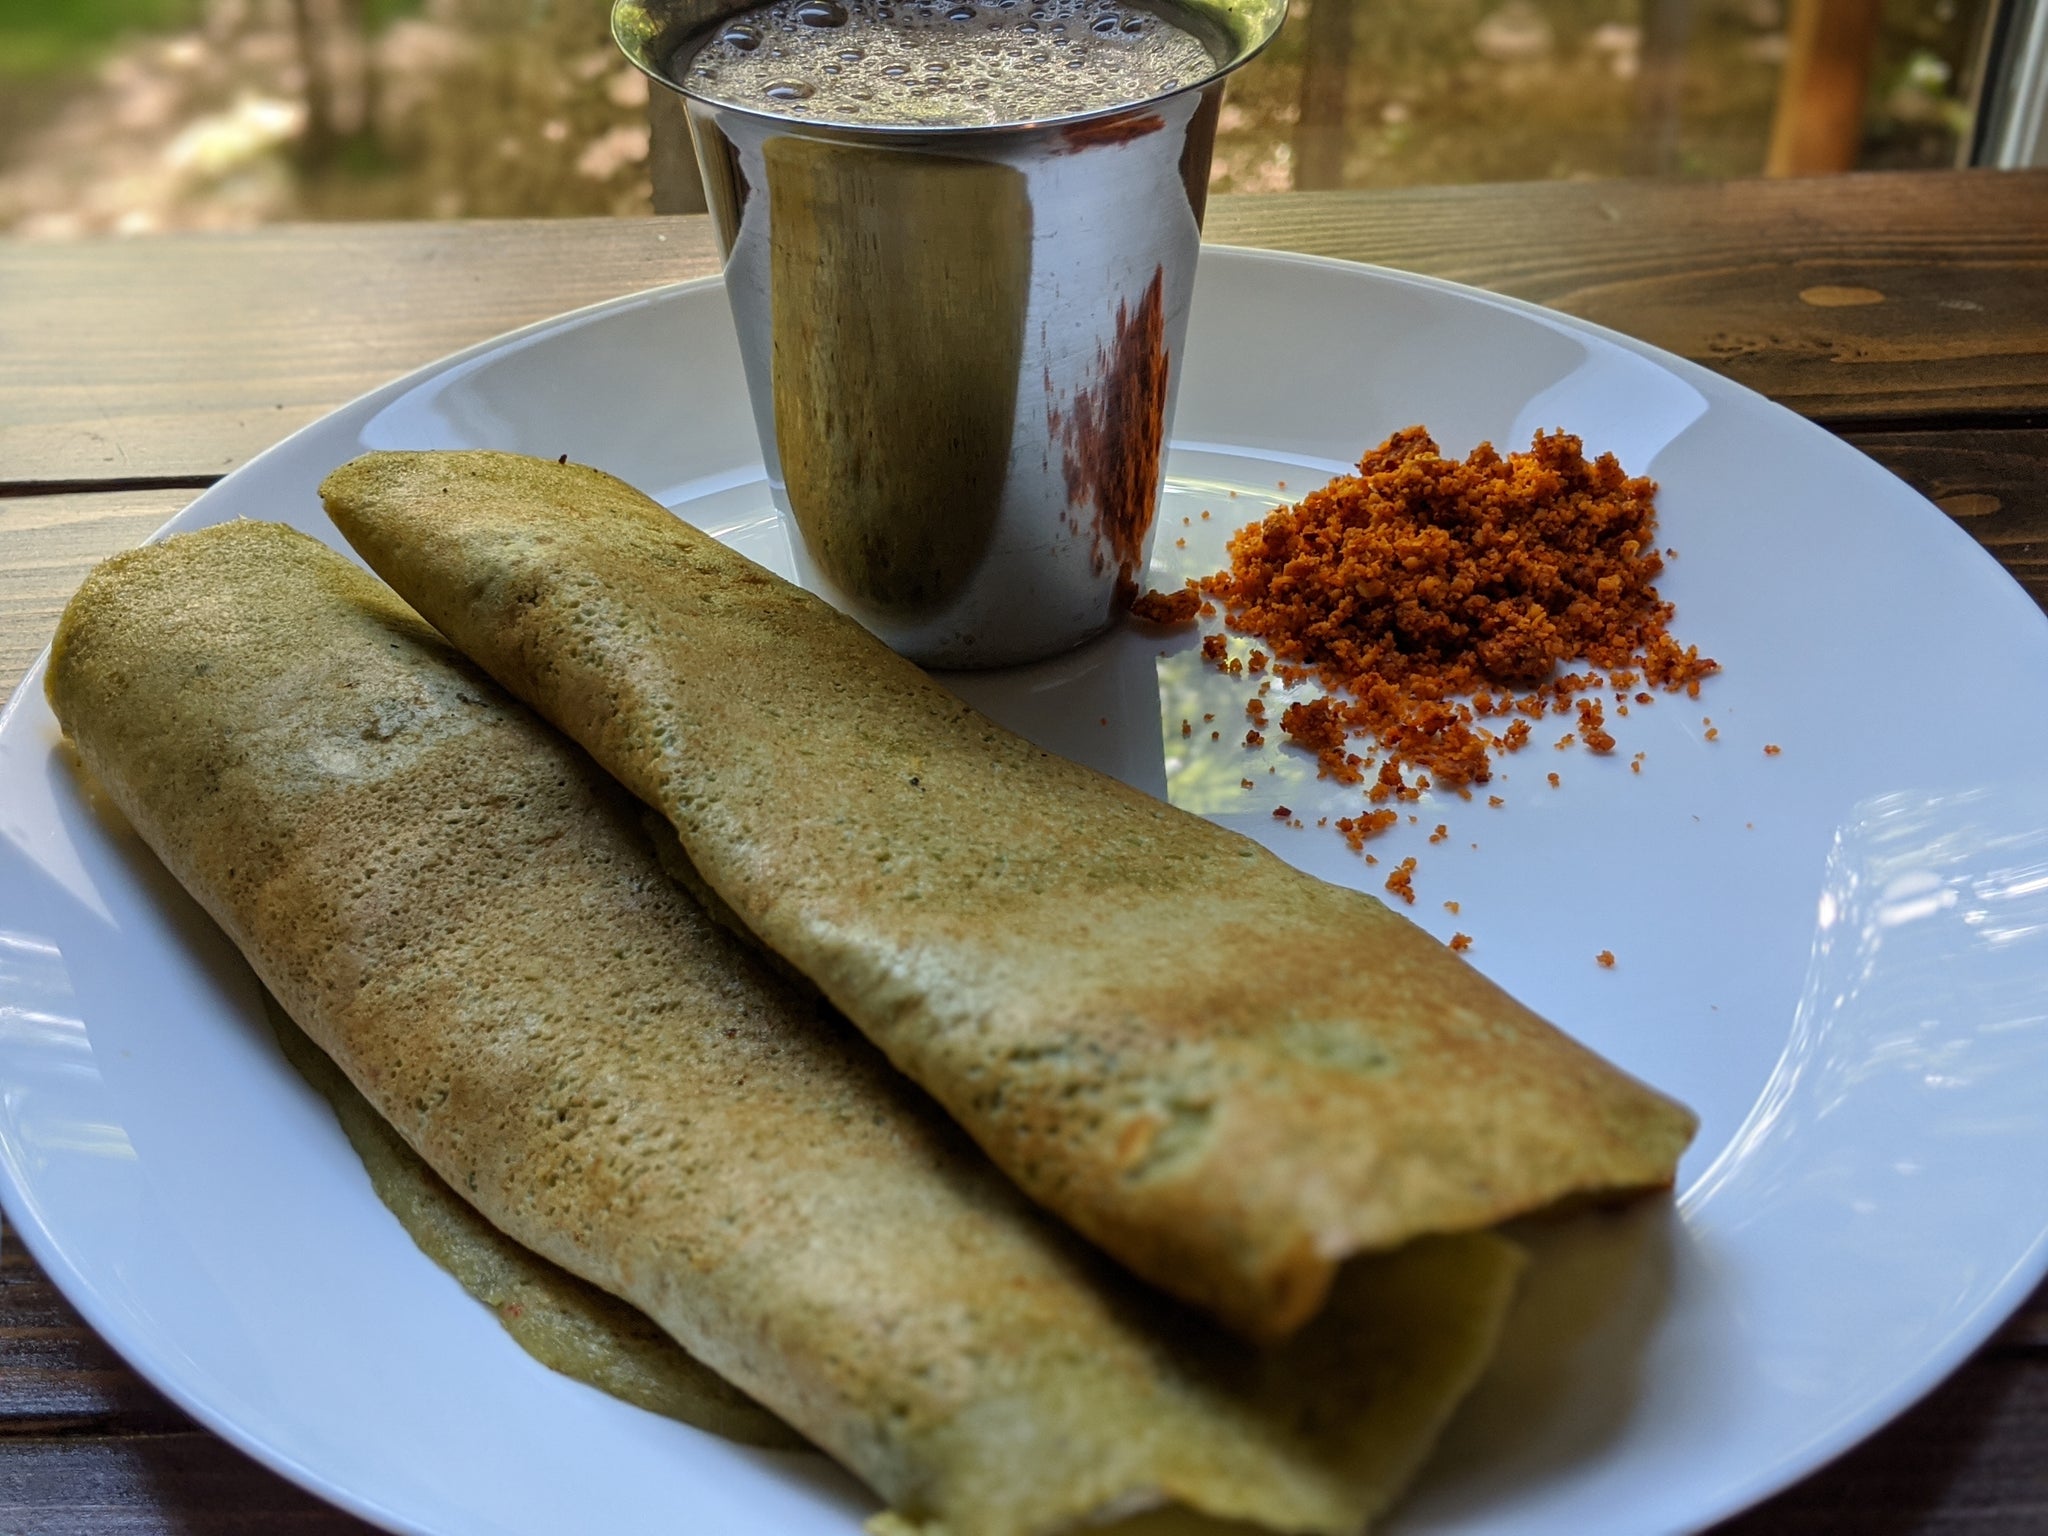 Delicious Savory pancakes made with SpiceFix Moringa Powder ready to eat! 